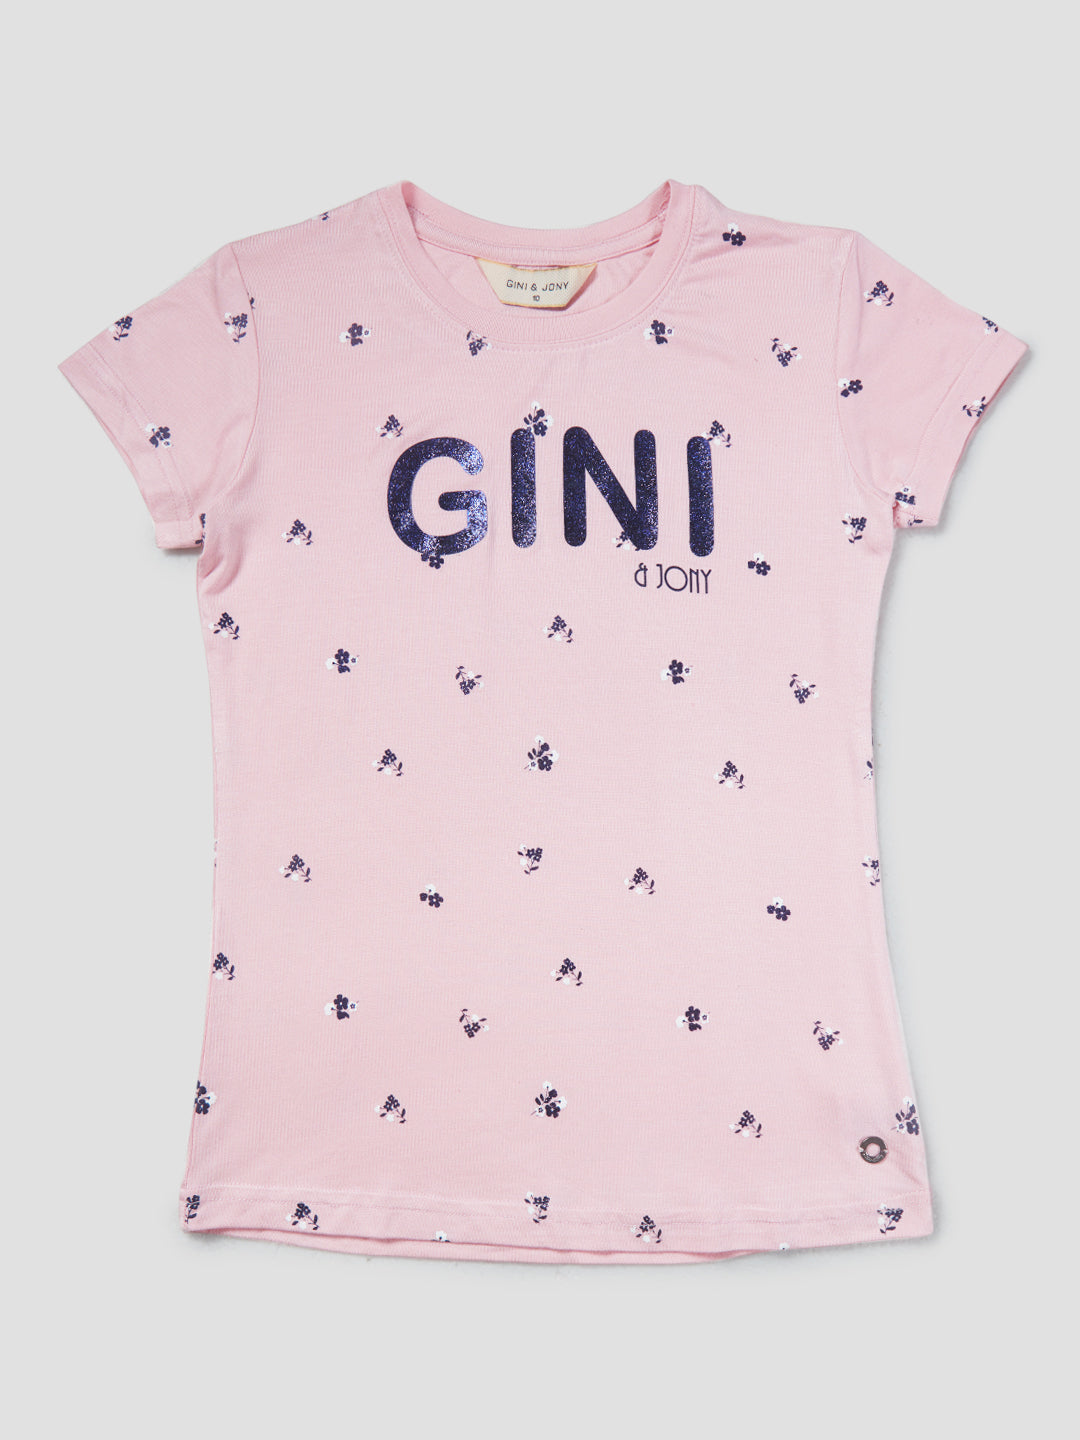 Girls Pink Cotton Printed Full Sleeves Knits Top